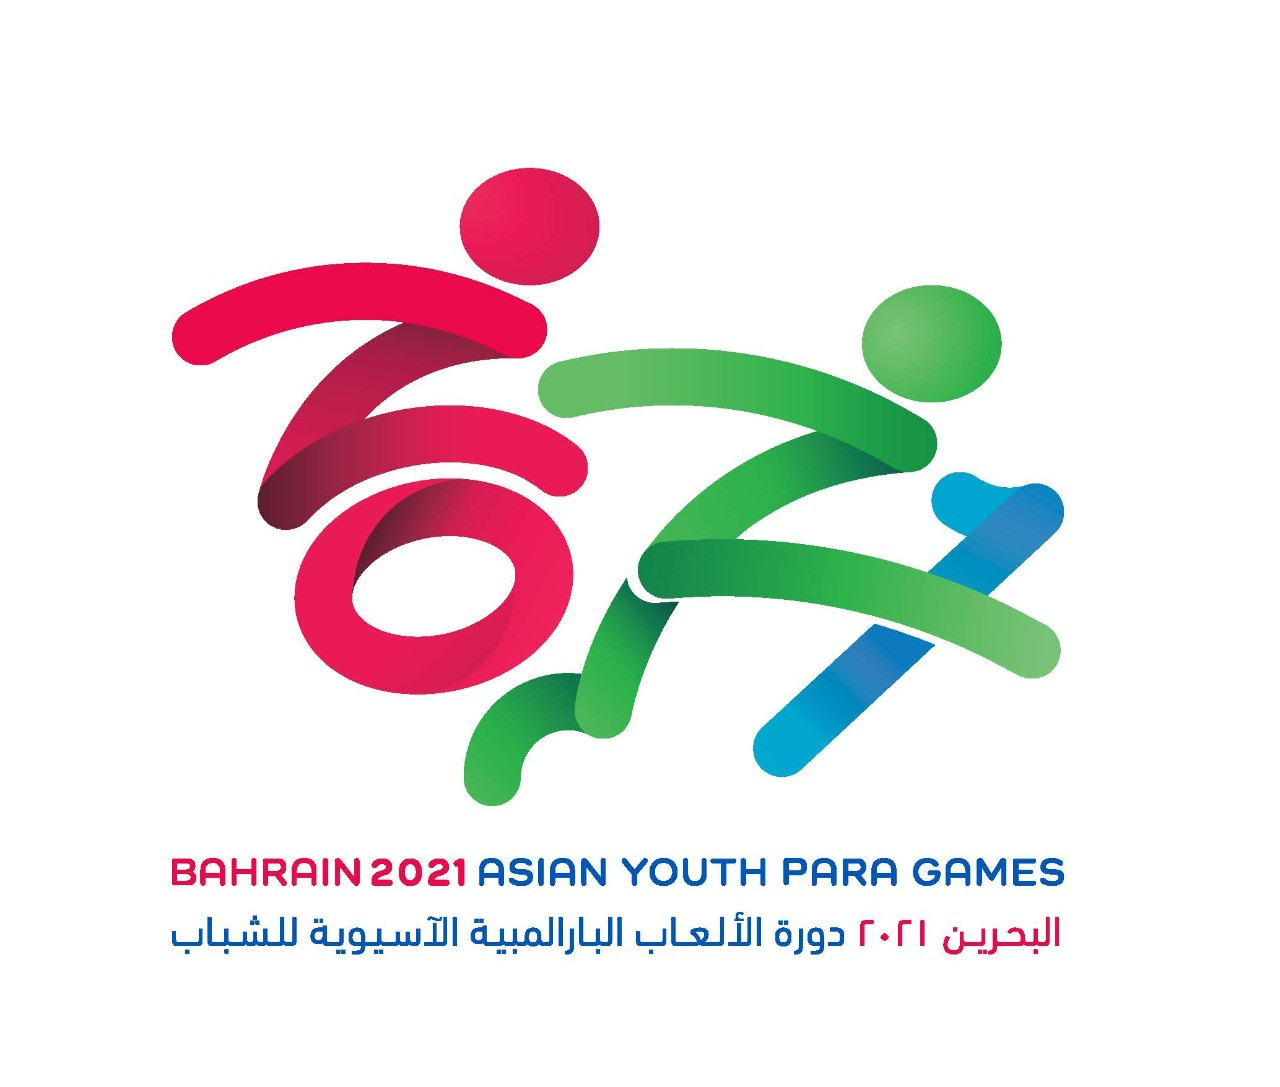 New logo unveiled for Bahrain 2021 Asian Youth Para Games